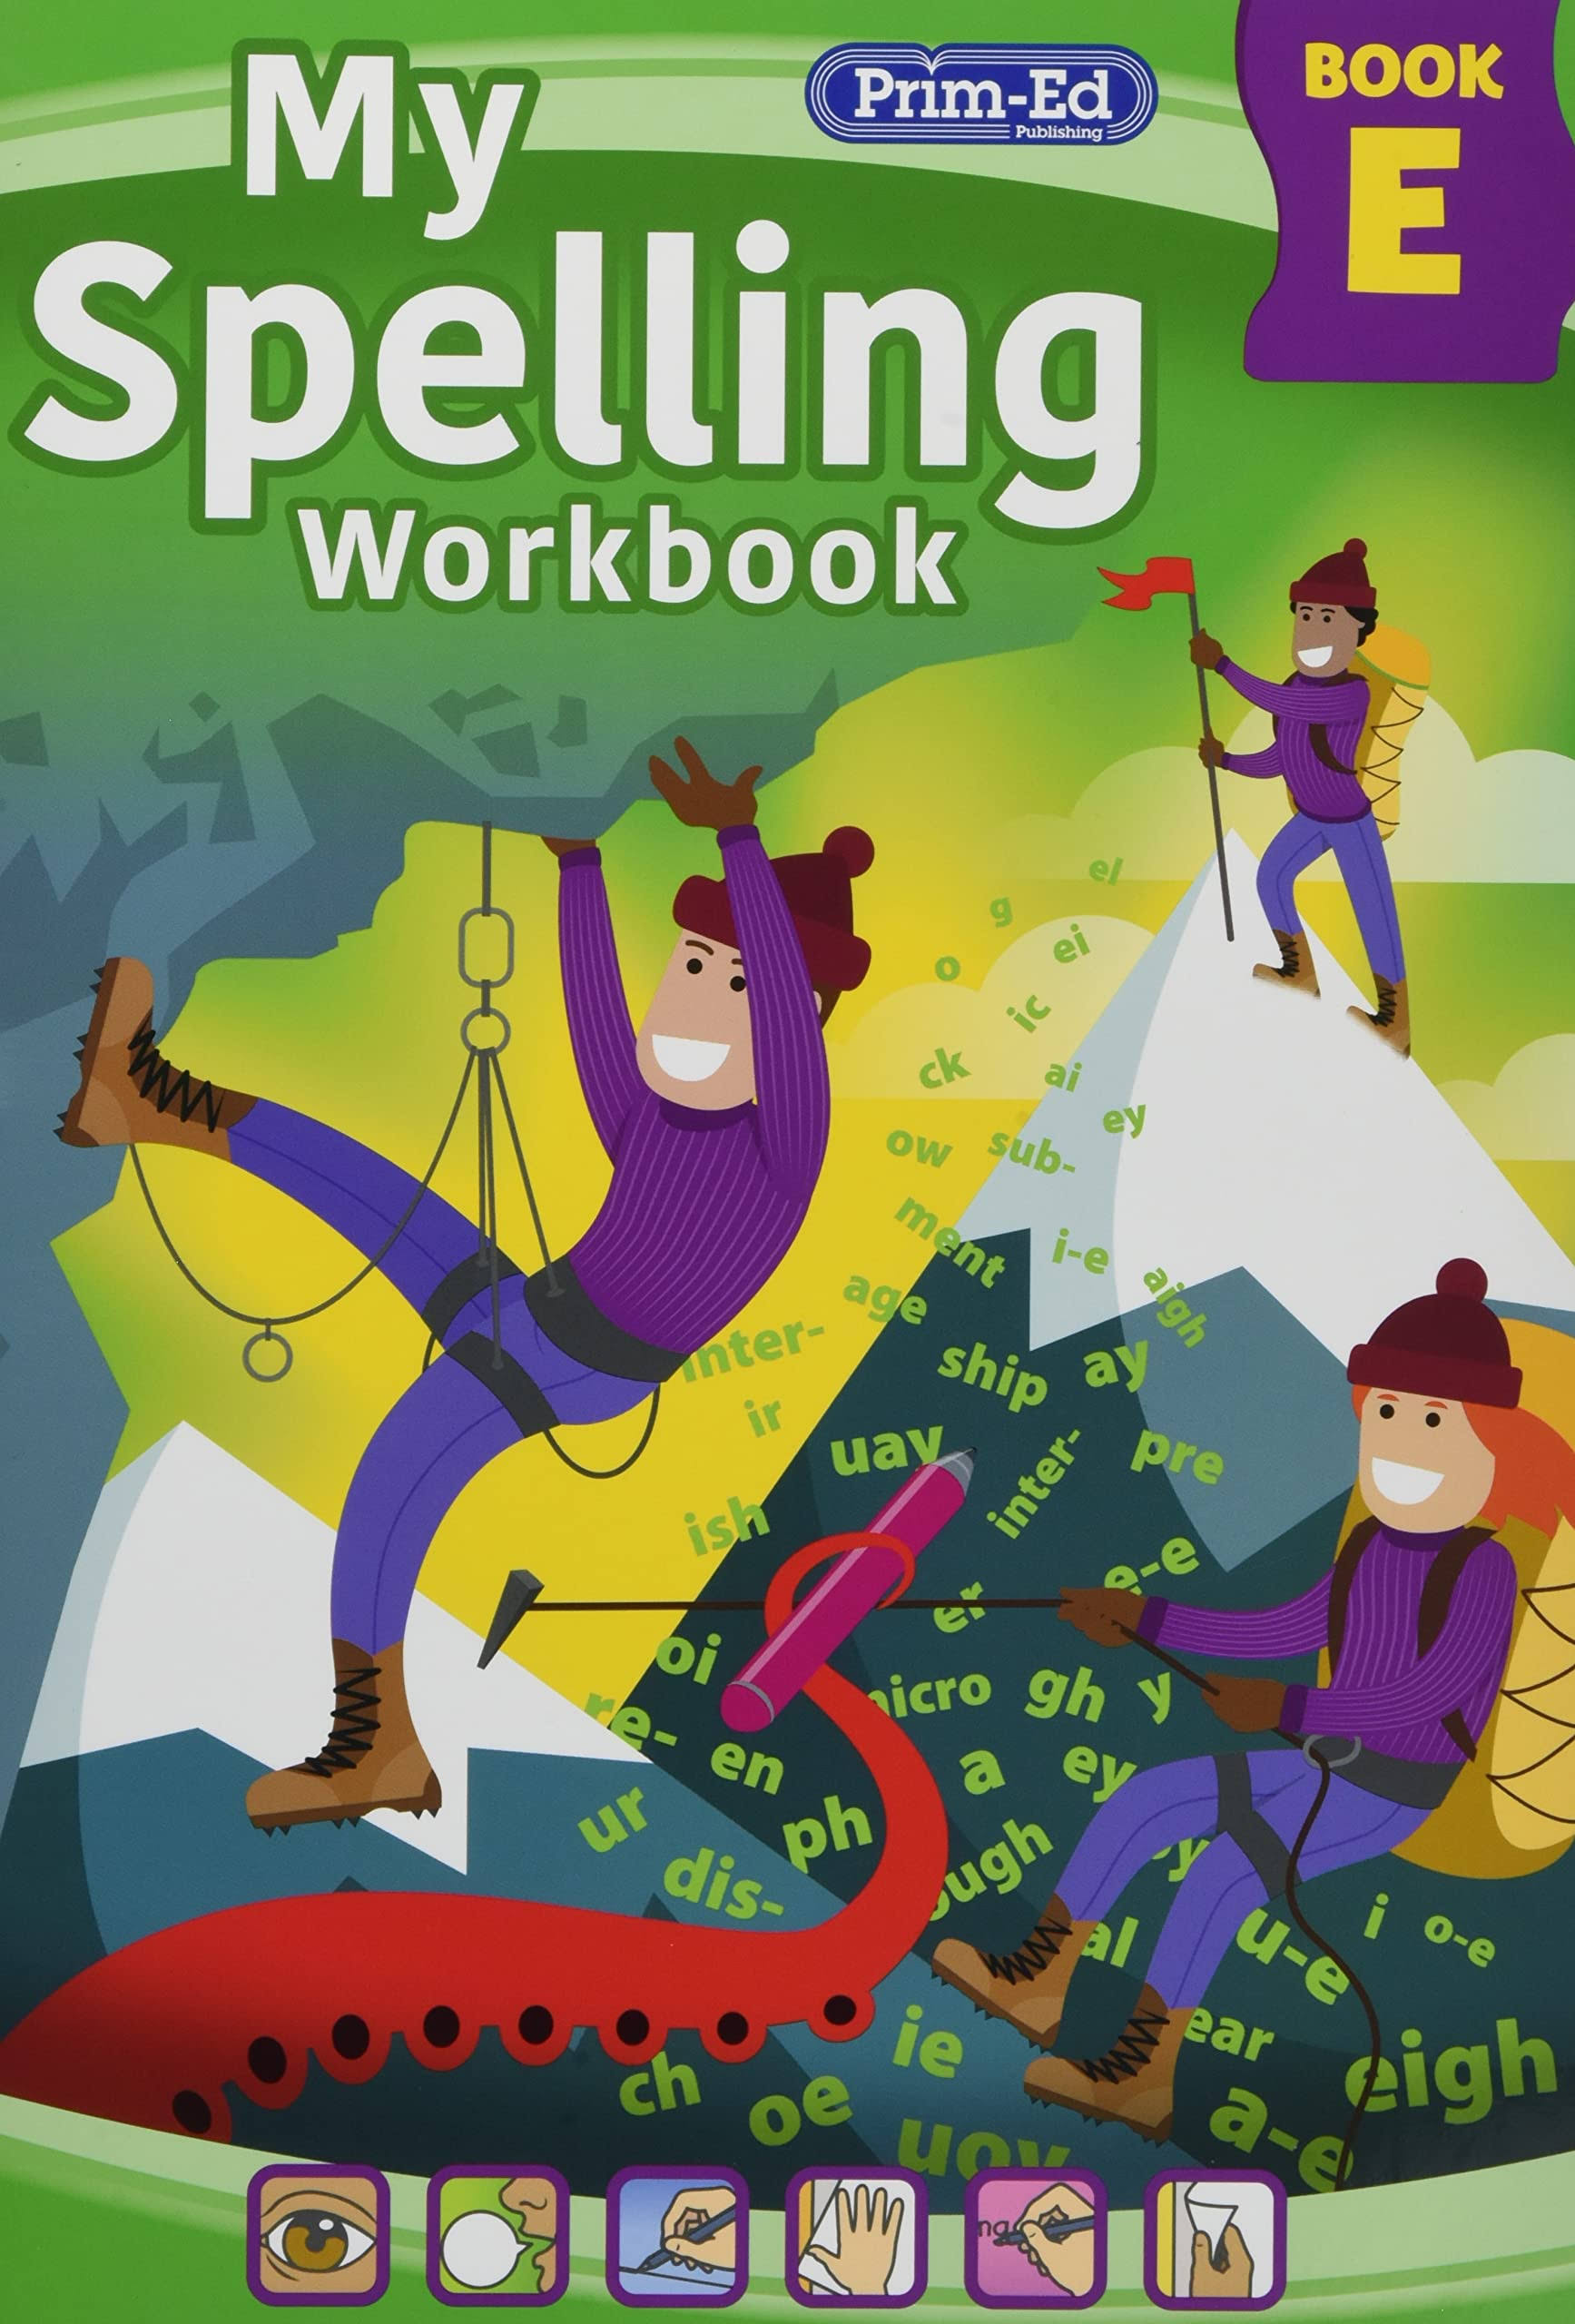 My Spelling Workbook Book E by RIC Publications